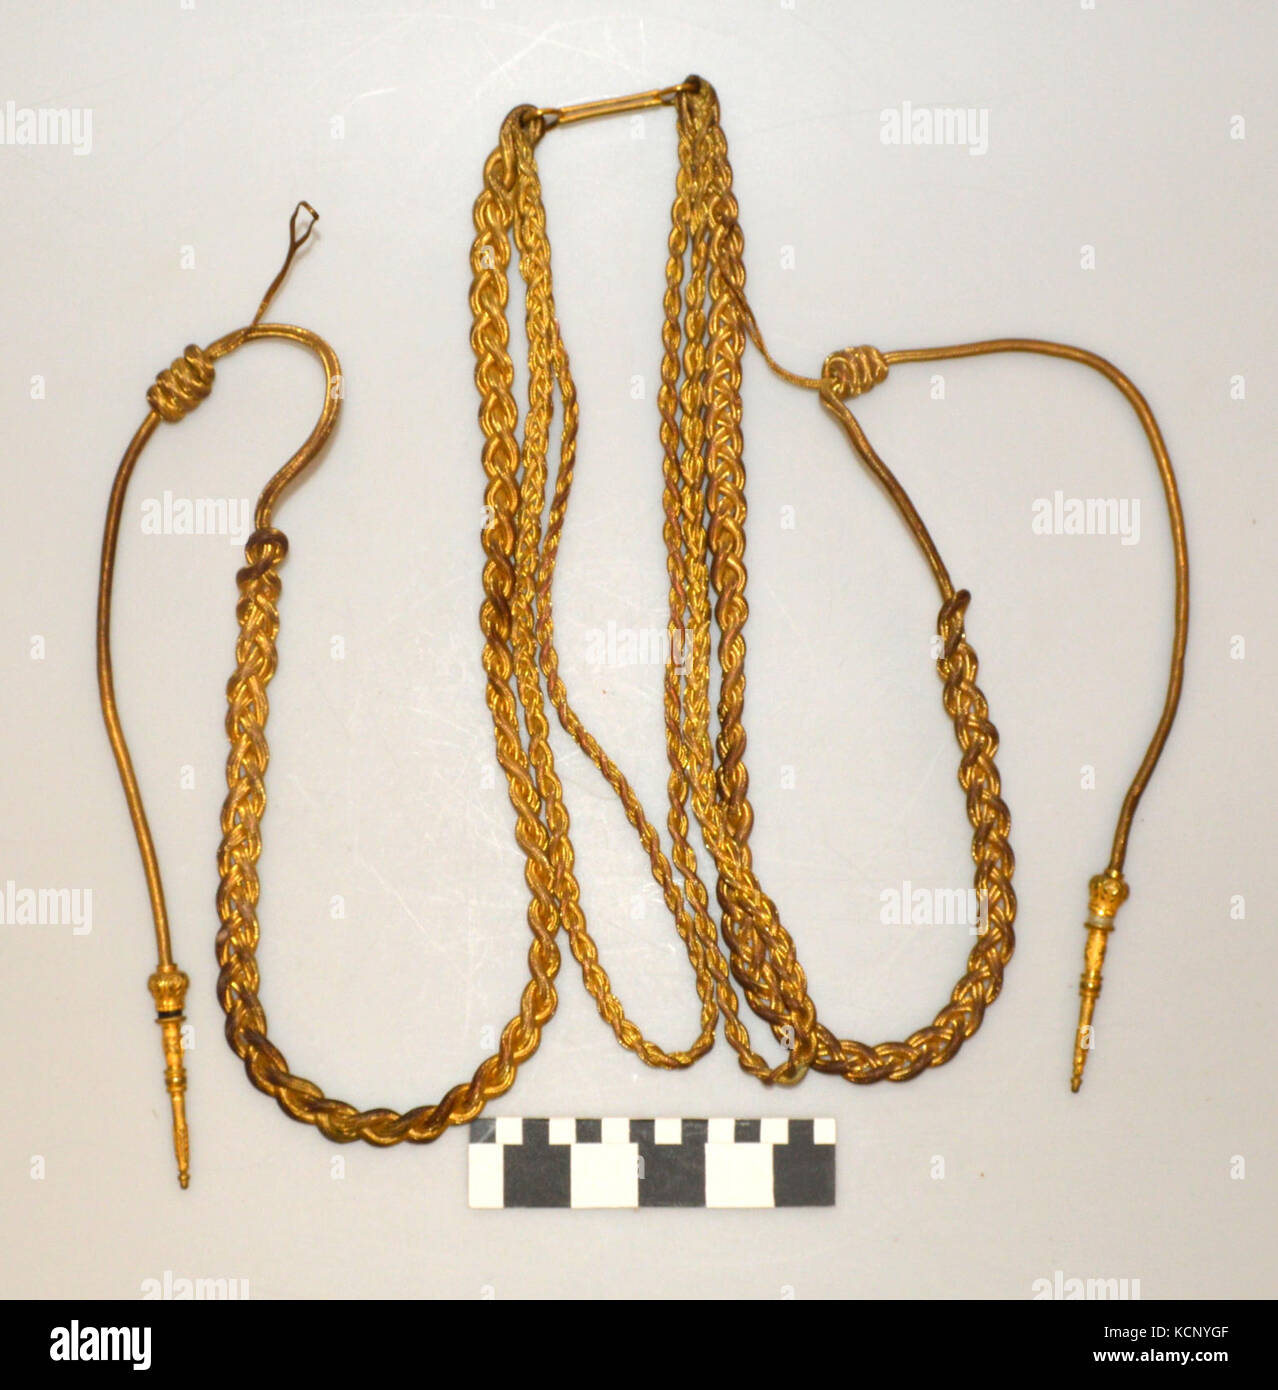 Gold Braided Aiguillette Stock Photo